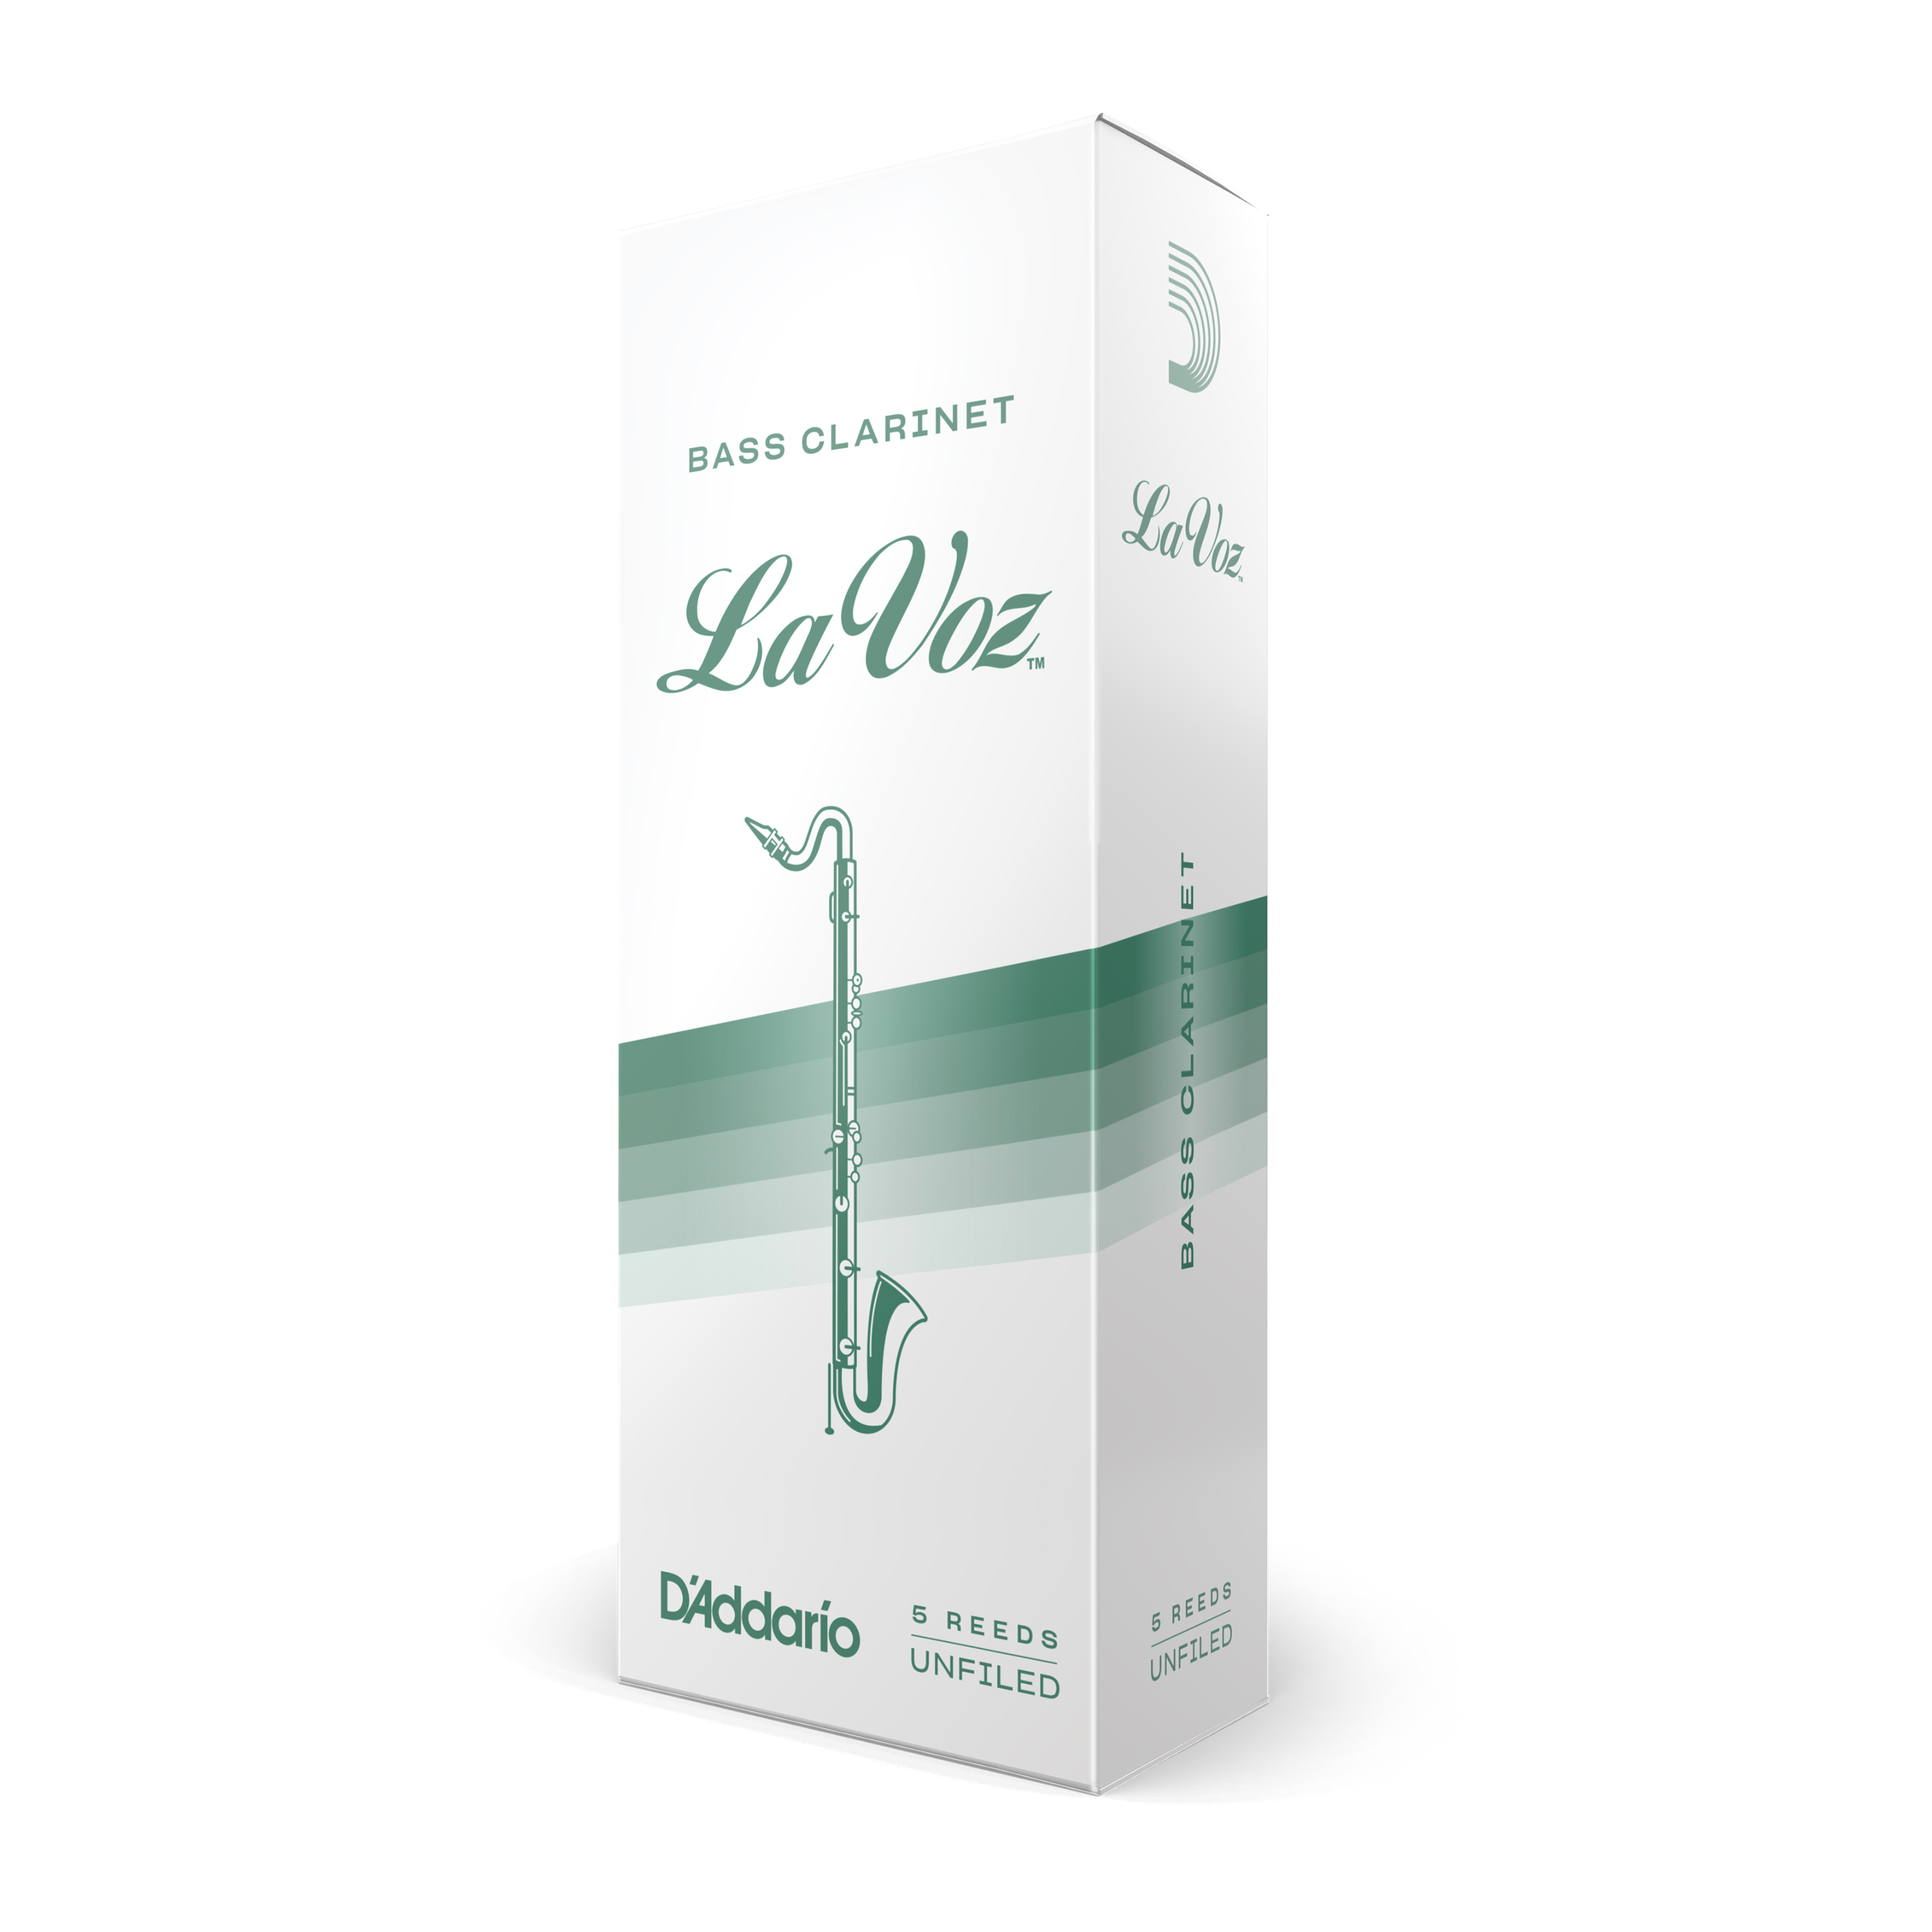 box of five LaVoz Bass Clarinet Reeds